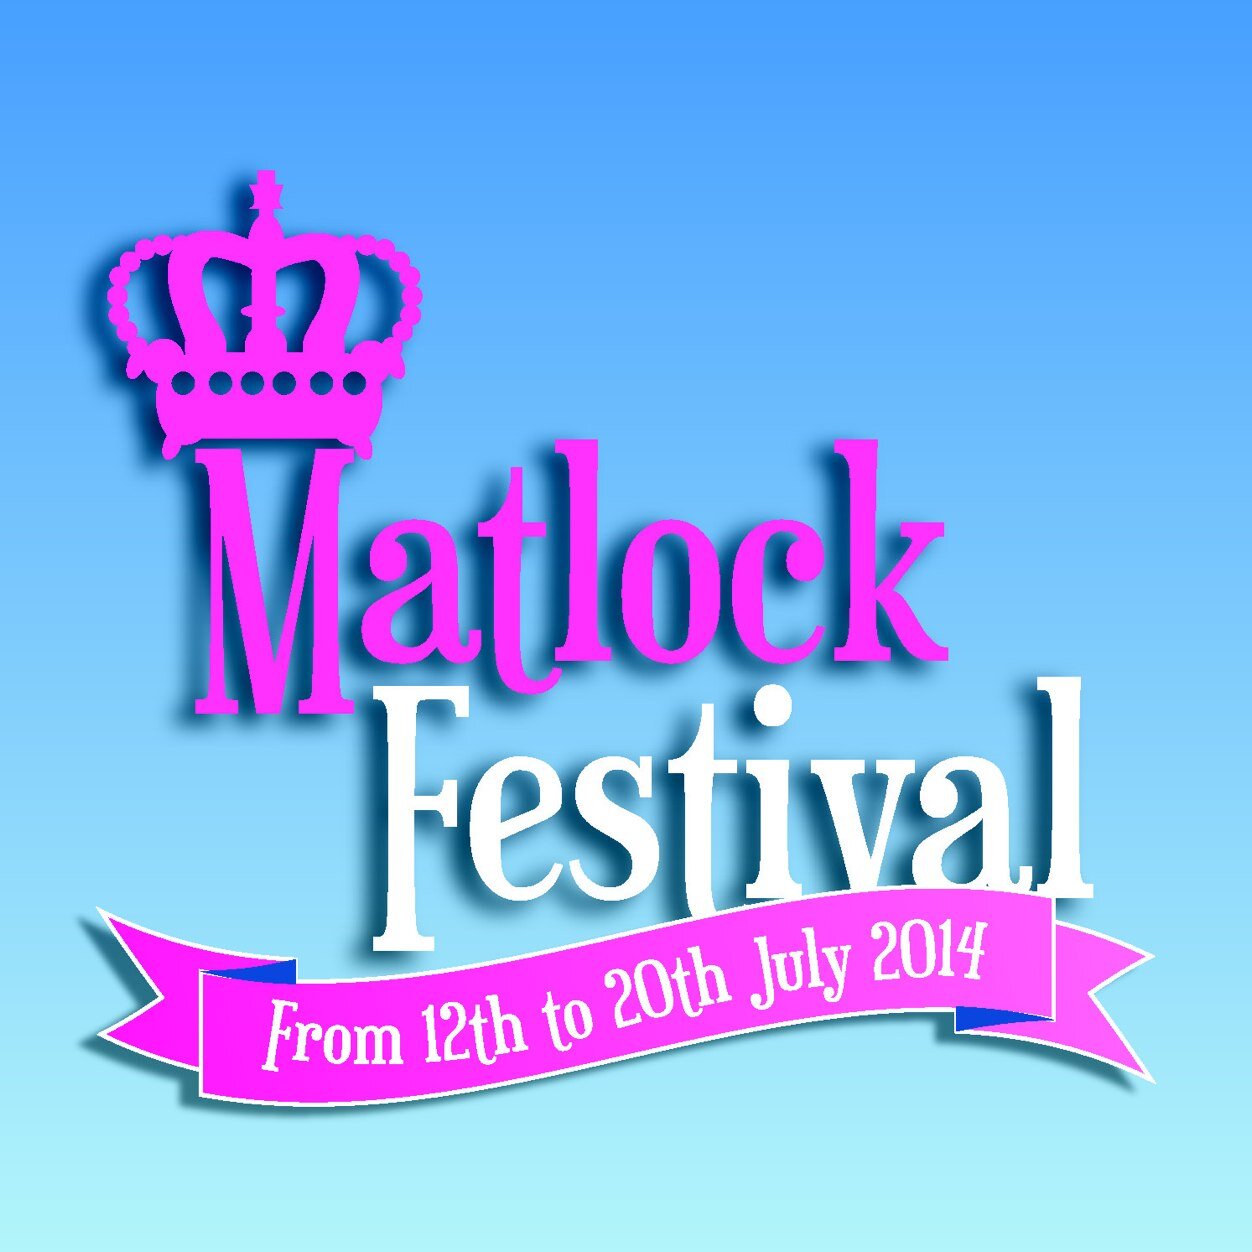 Follow us for the latest information on Matlock Festival :)